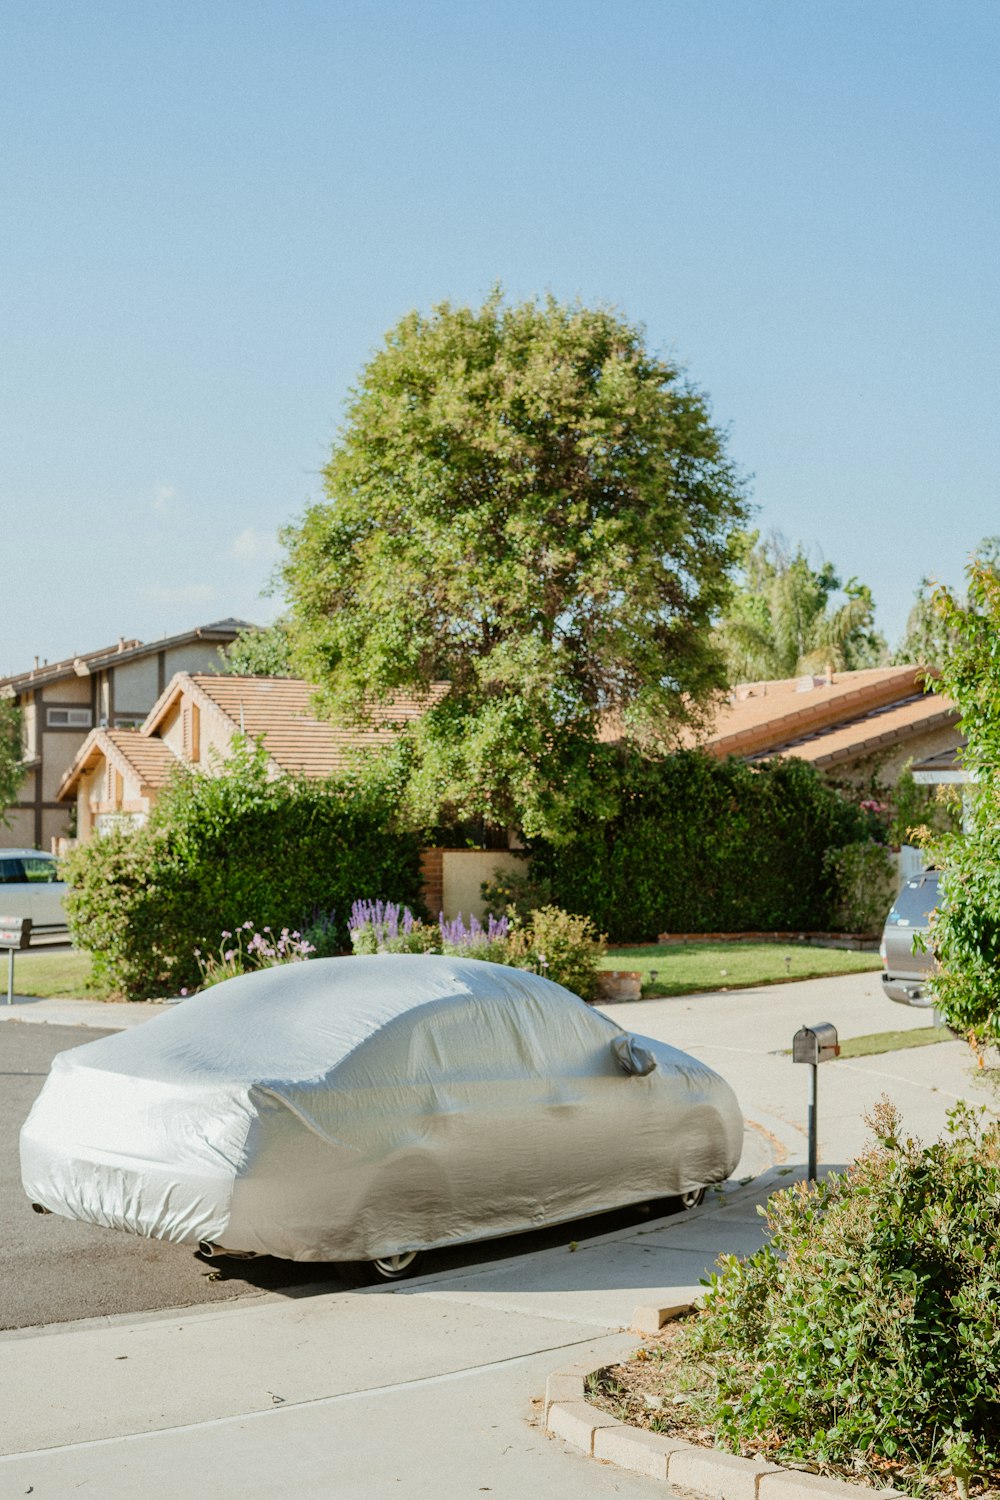 a car covered in a white tarp parked on the side of the road